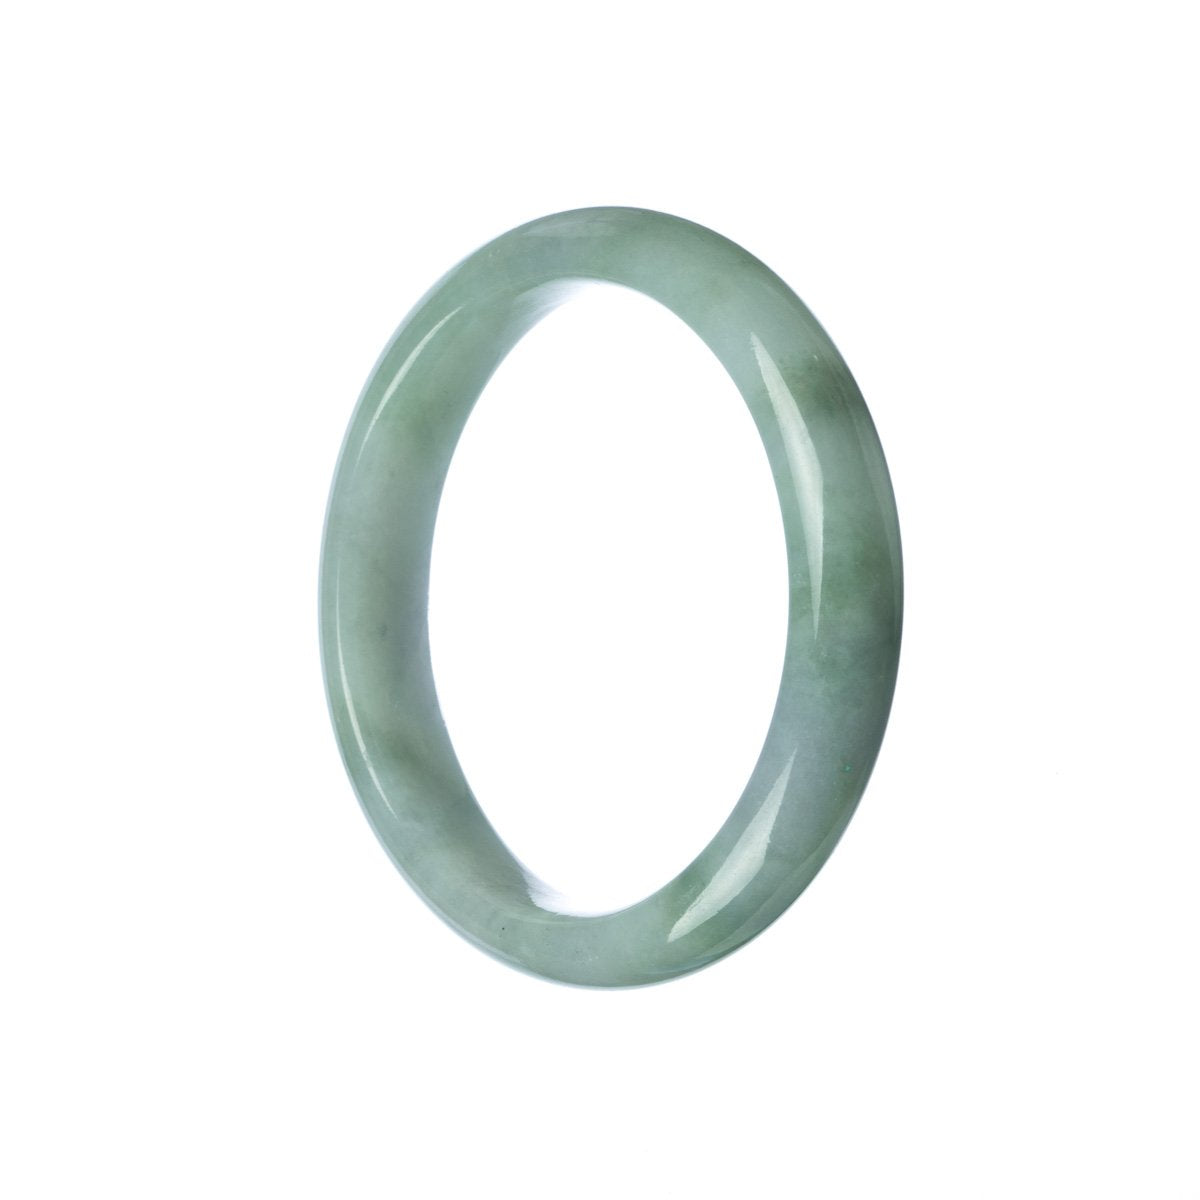 A high-quality half moon-shaped grey jade bangle, made from genuine Type A Grey Jadeite Jade, measuring 55mm in size.